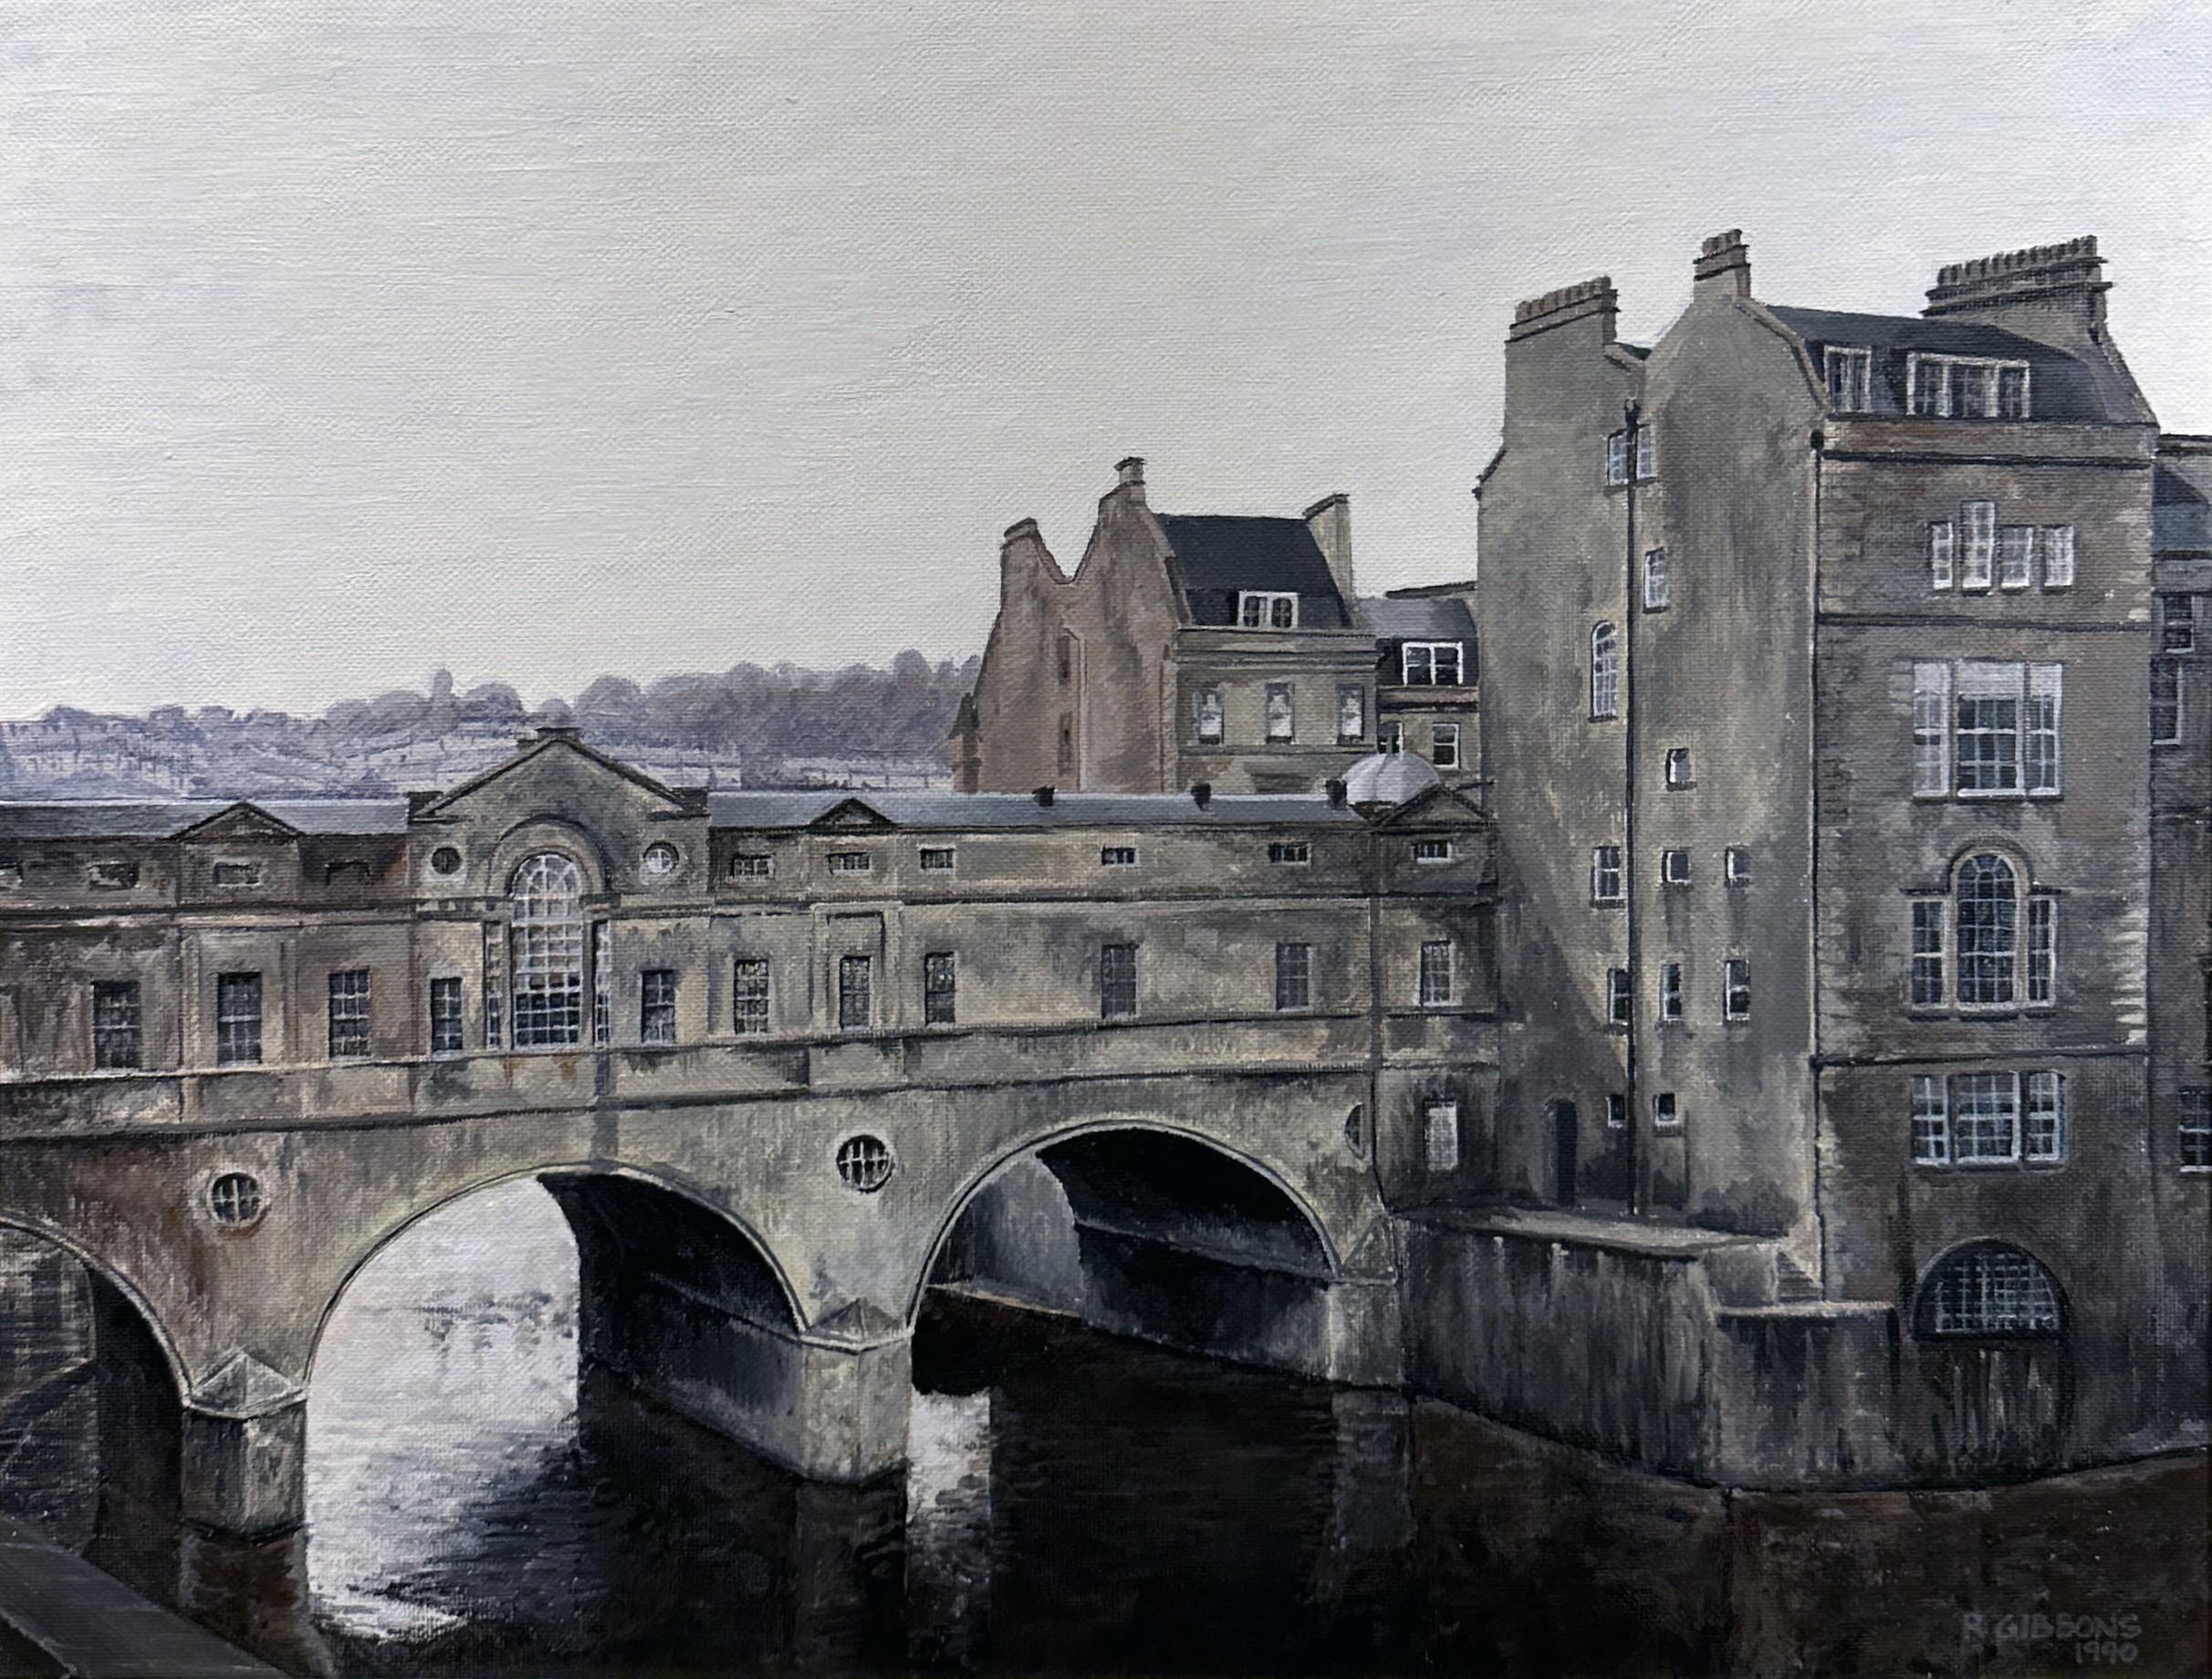 Pulteney Bridge, Bath, England - Framed Landscape, Original Oil on Canvas - Contemporary Painting by Richard Gibbons